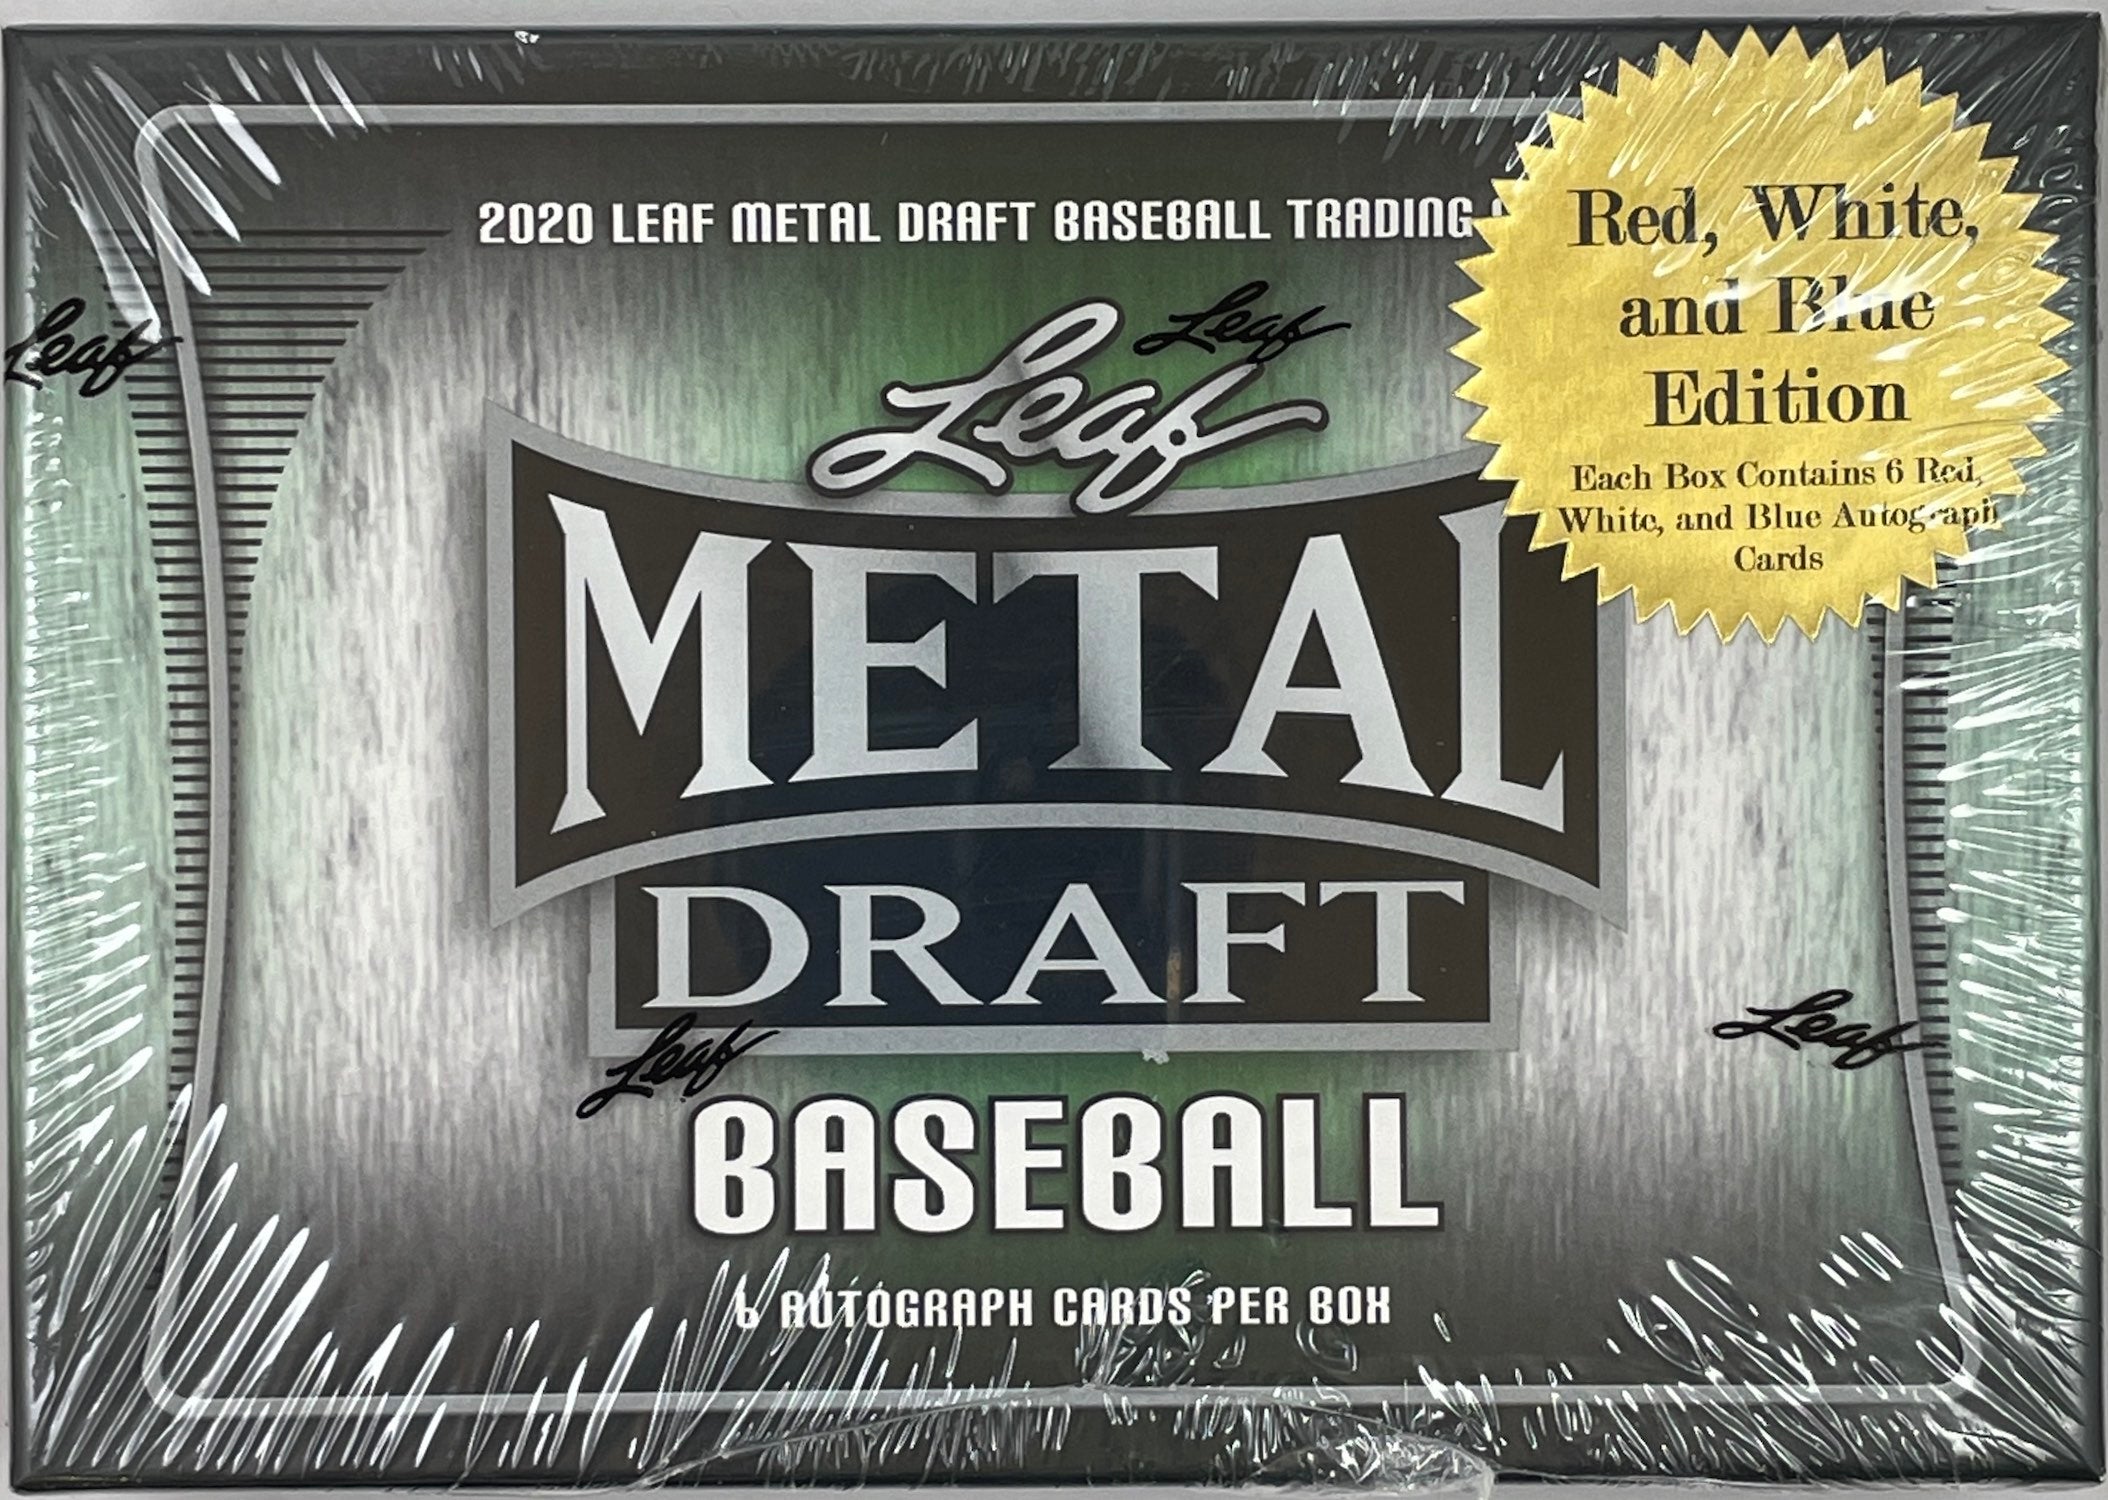 2020 Leaf Metal Draft Baseball Red, White and Blue Edition - Sports Cards Norge